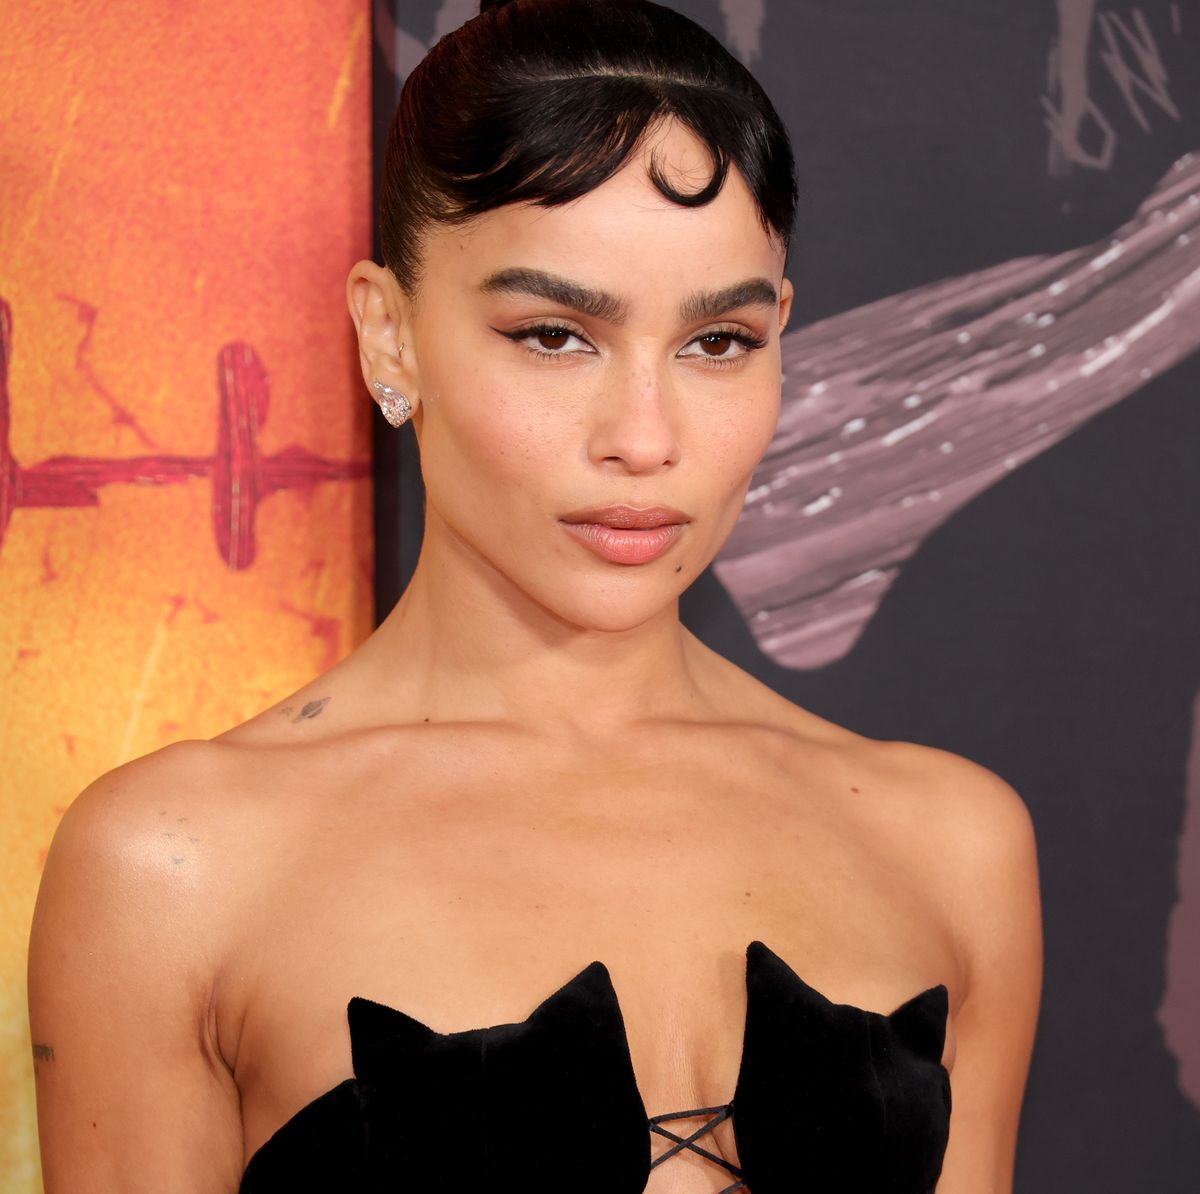 This $48 Highlighter Was the Star of Zoë Kravitz's Catwoman Makeup Look